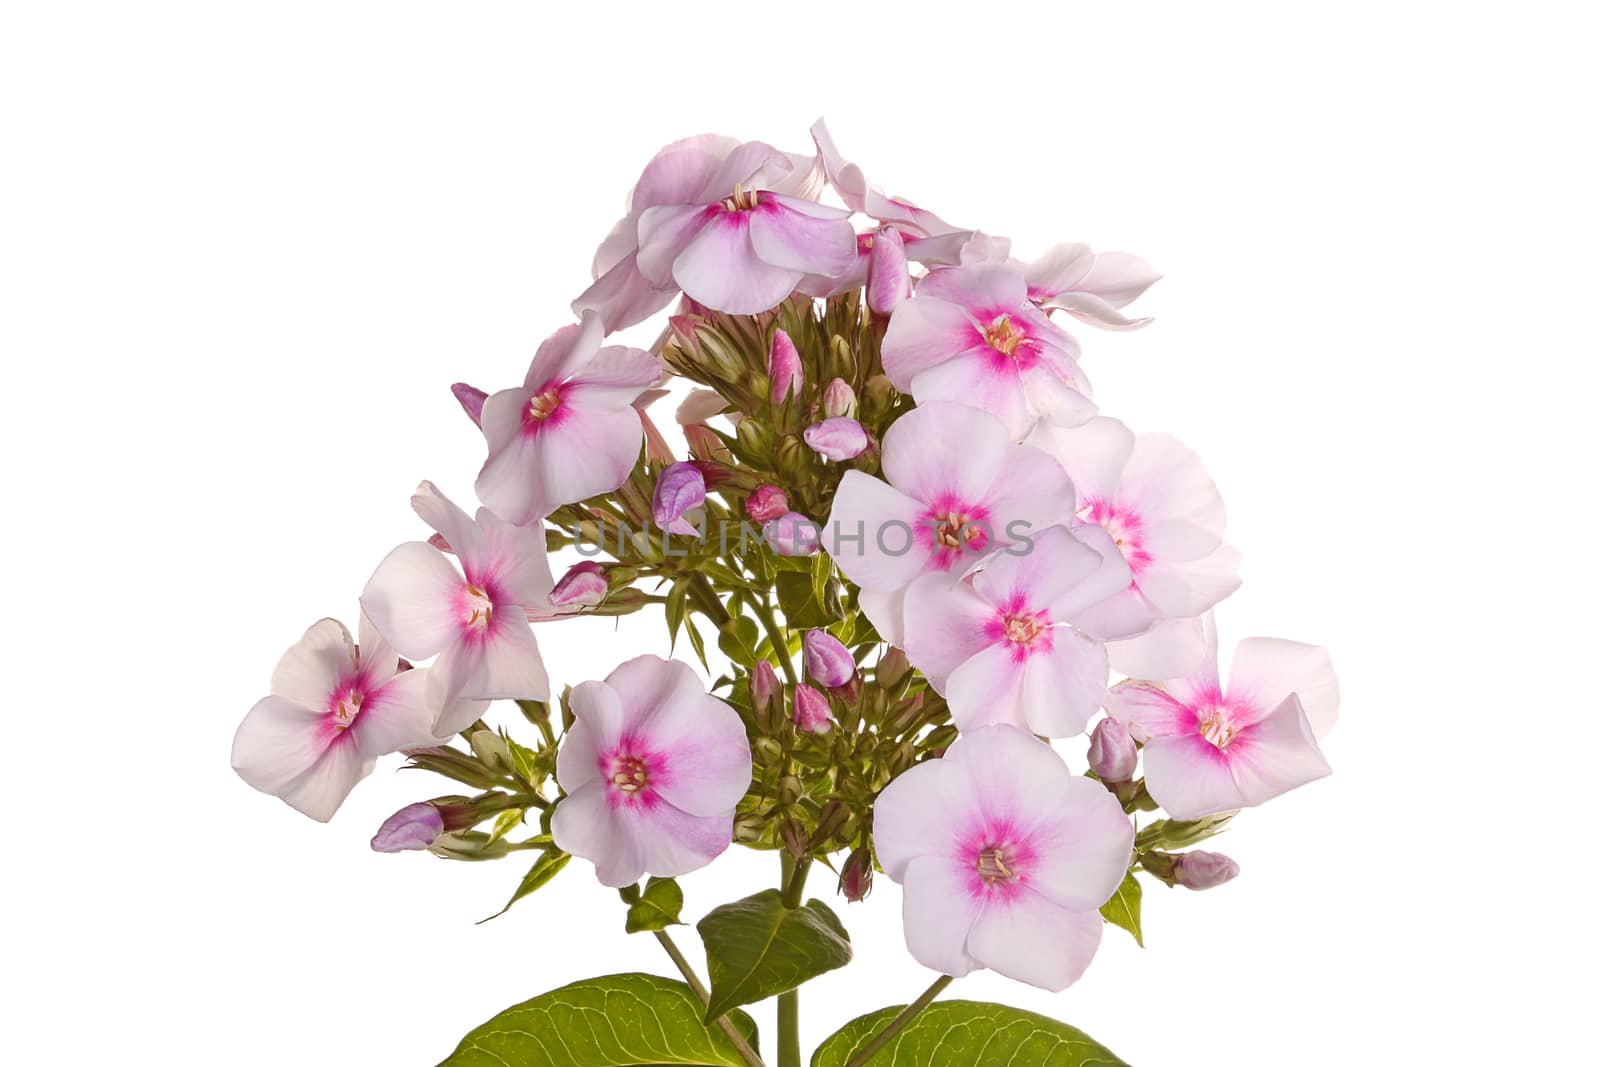 A single stem with many white and pink flowers of phlox (Phlox paniculata) and leaves isolated against a white background